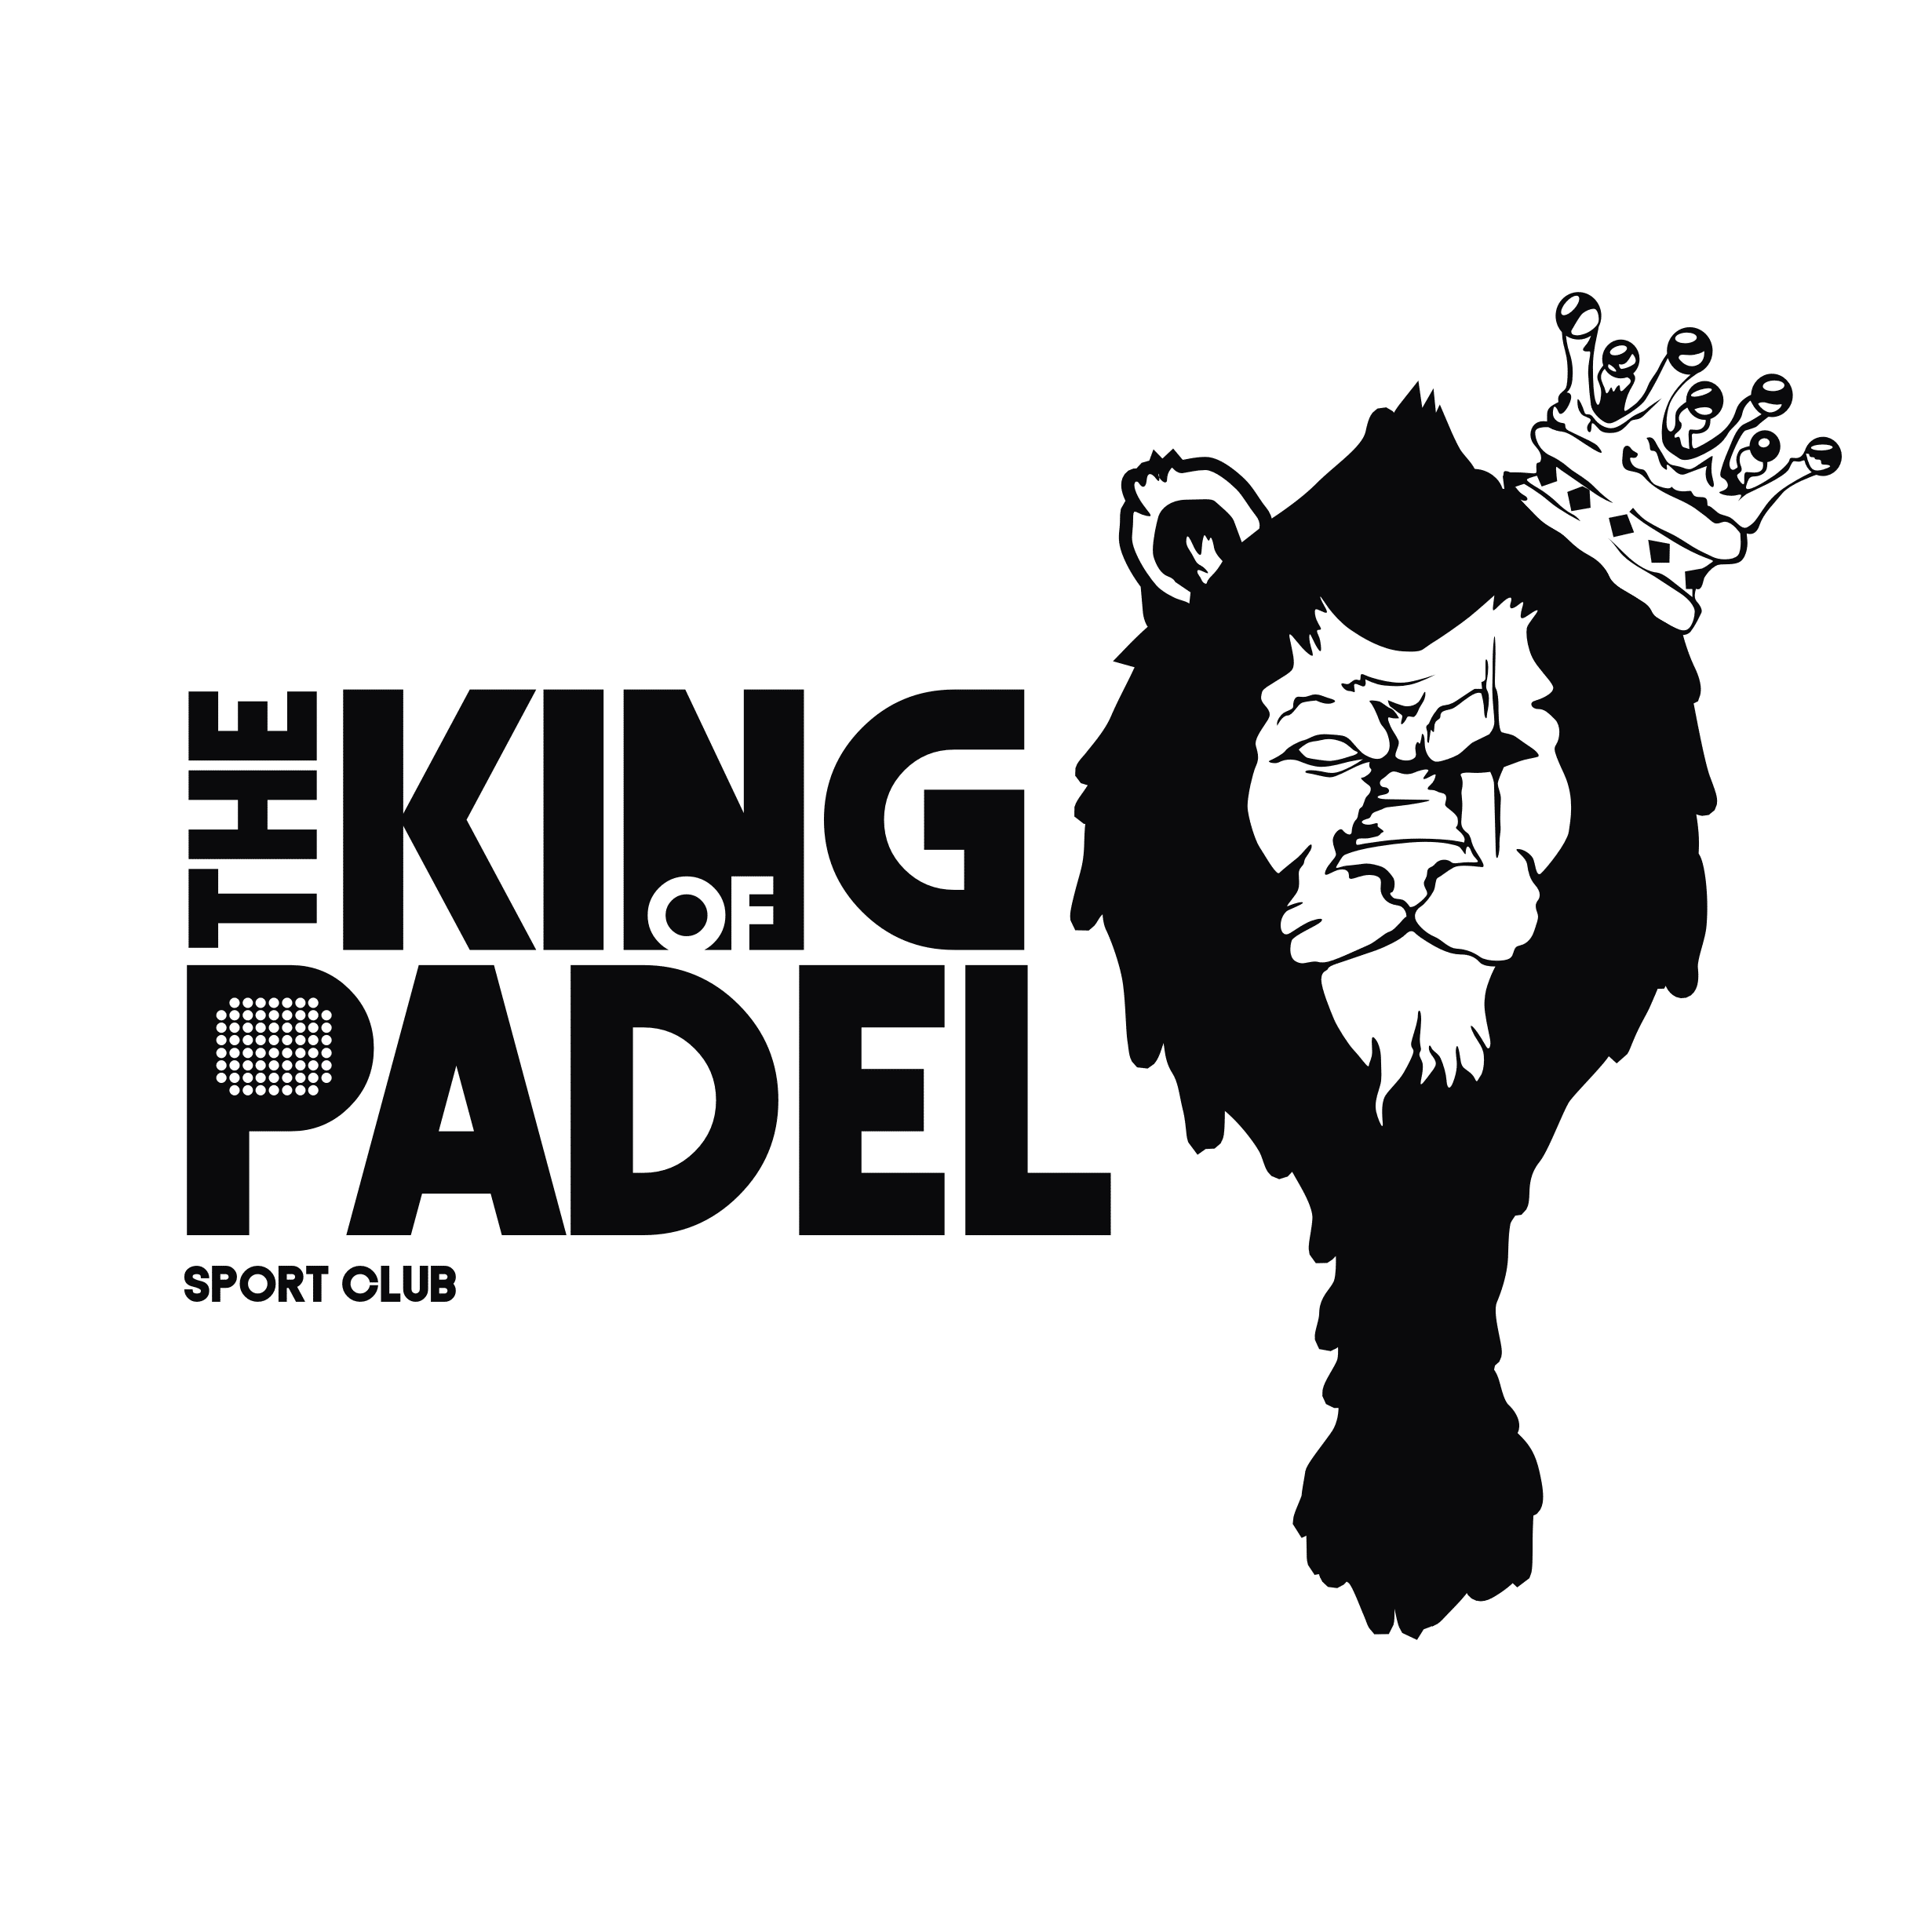 Graphic logo featuring a lion's head wearing a crown with the text "the king of padel sport club".